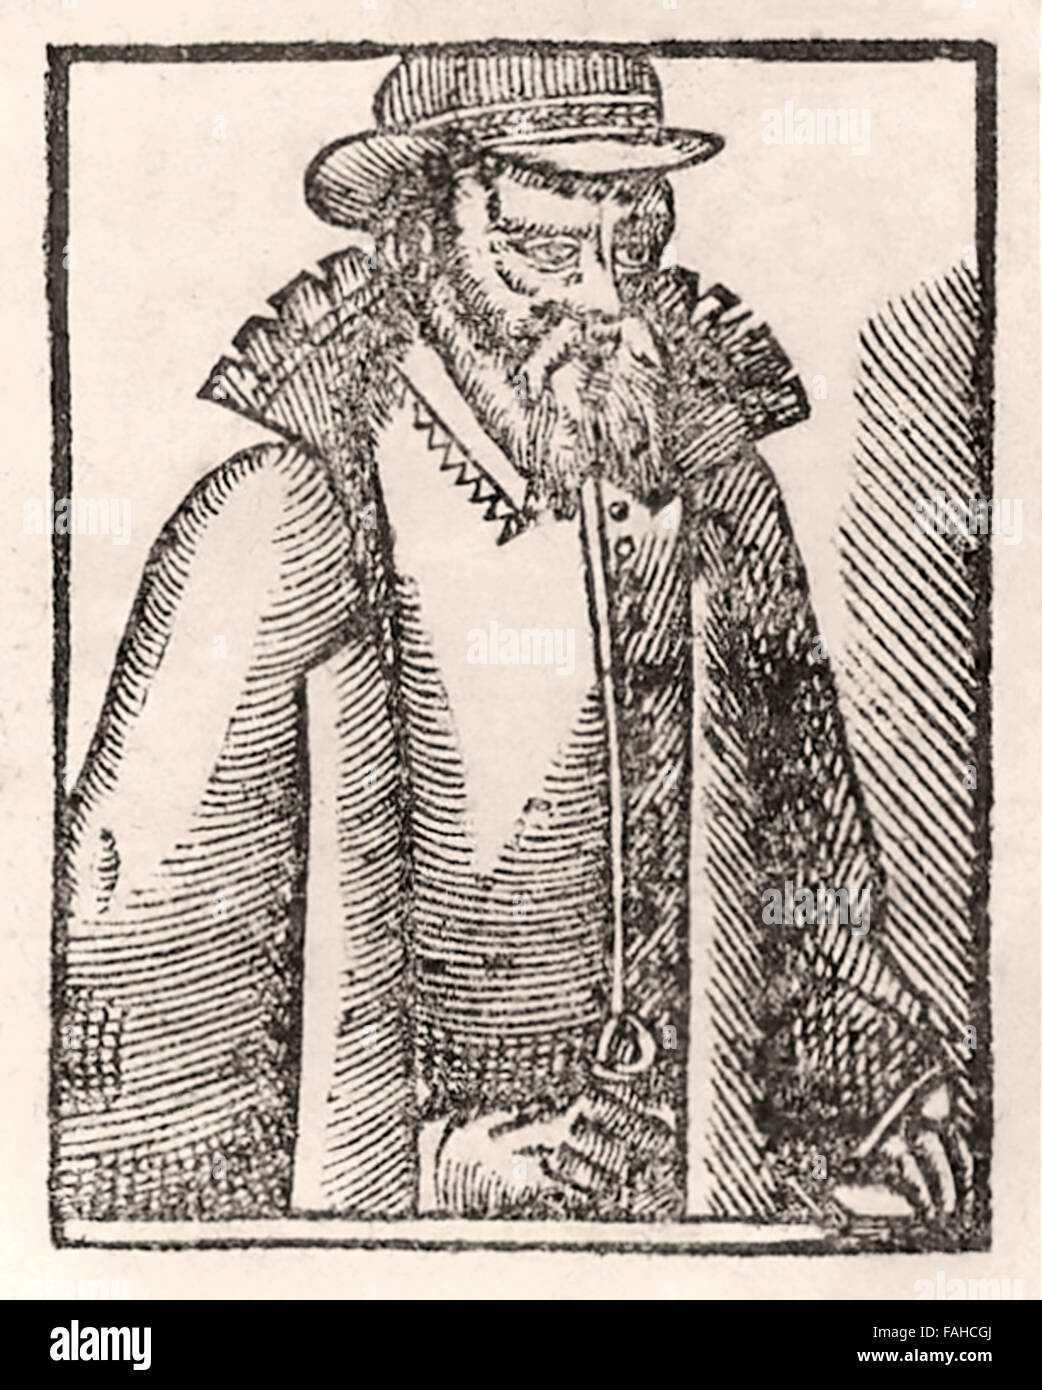 Woodcut portrait of Nostradamus (1503-1566) from title page of 1568 edition of 'Les Propheties de M. Michel Nostradamvs' first published in 1555. Stock Photo